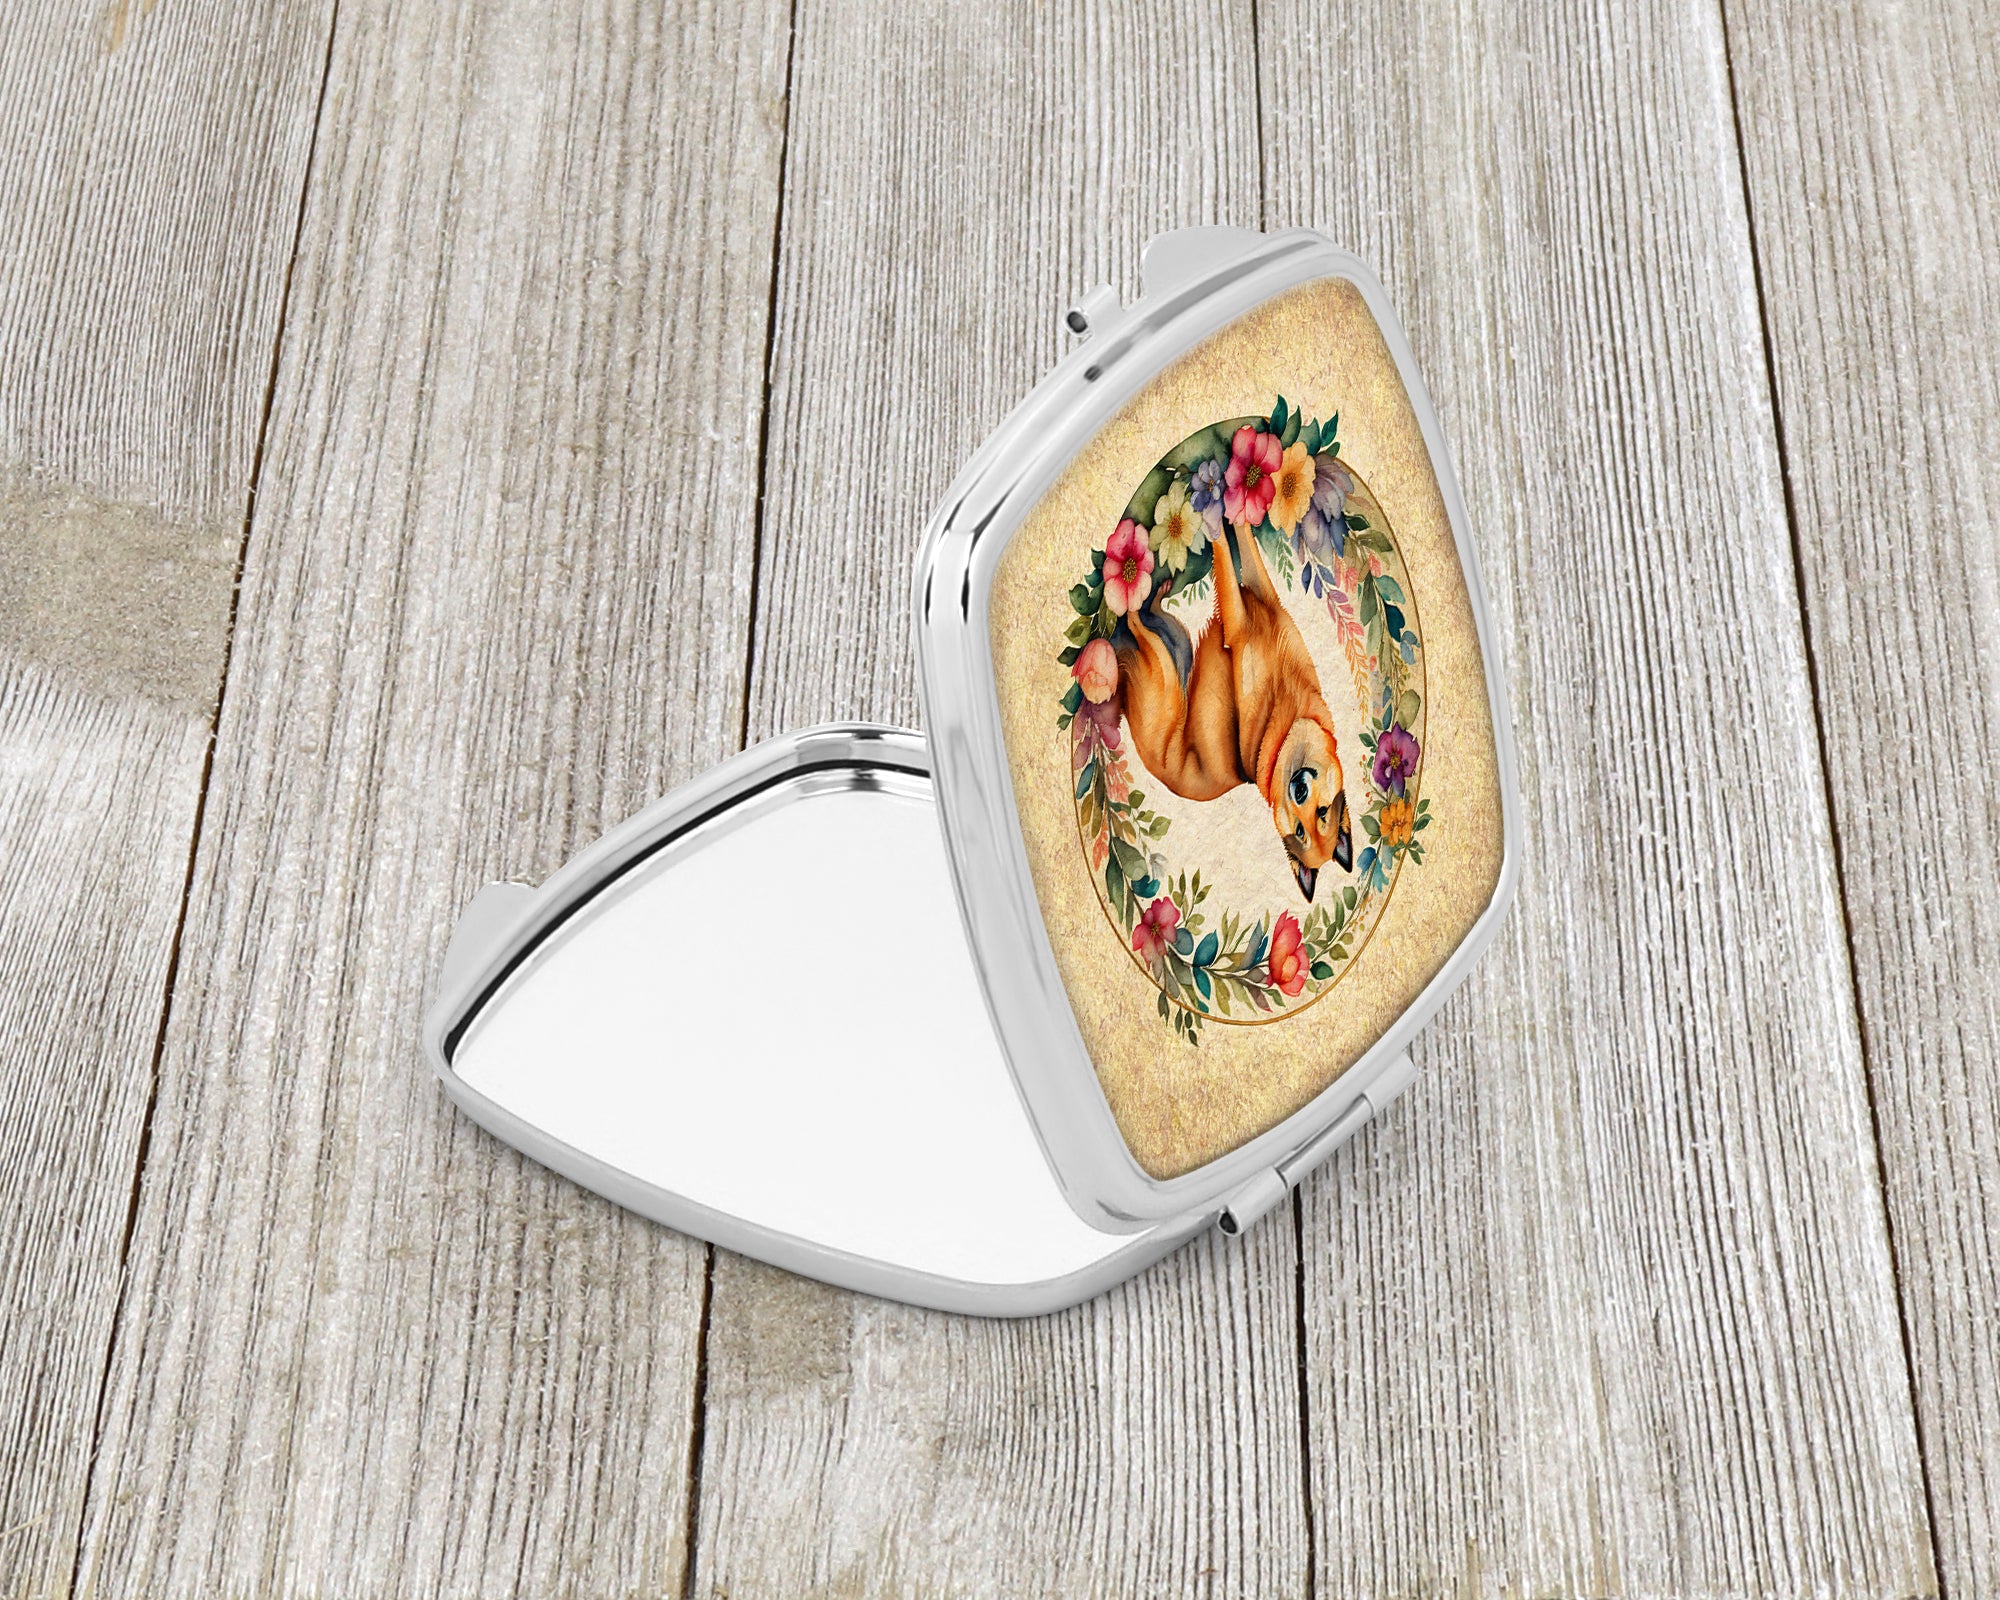 Finnish Spitz and Flowers Compact Mirror